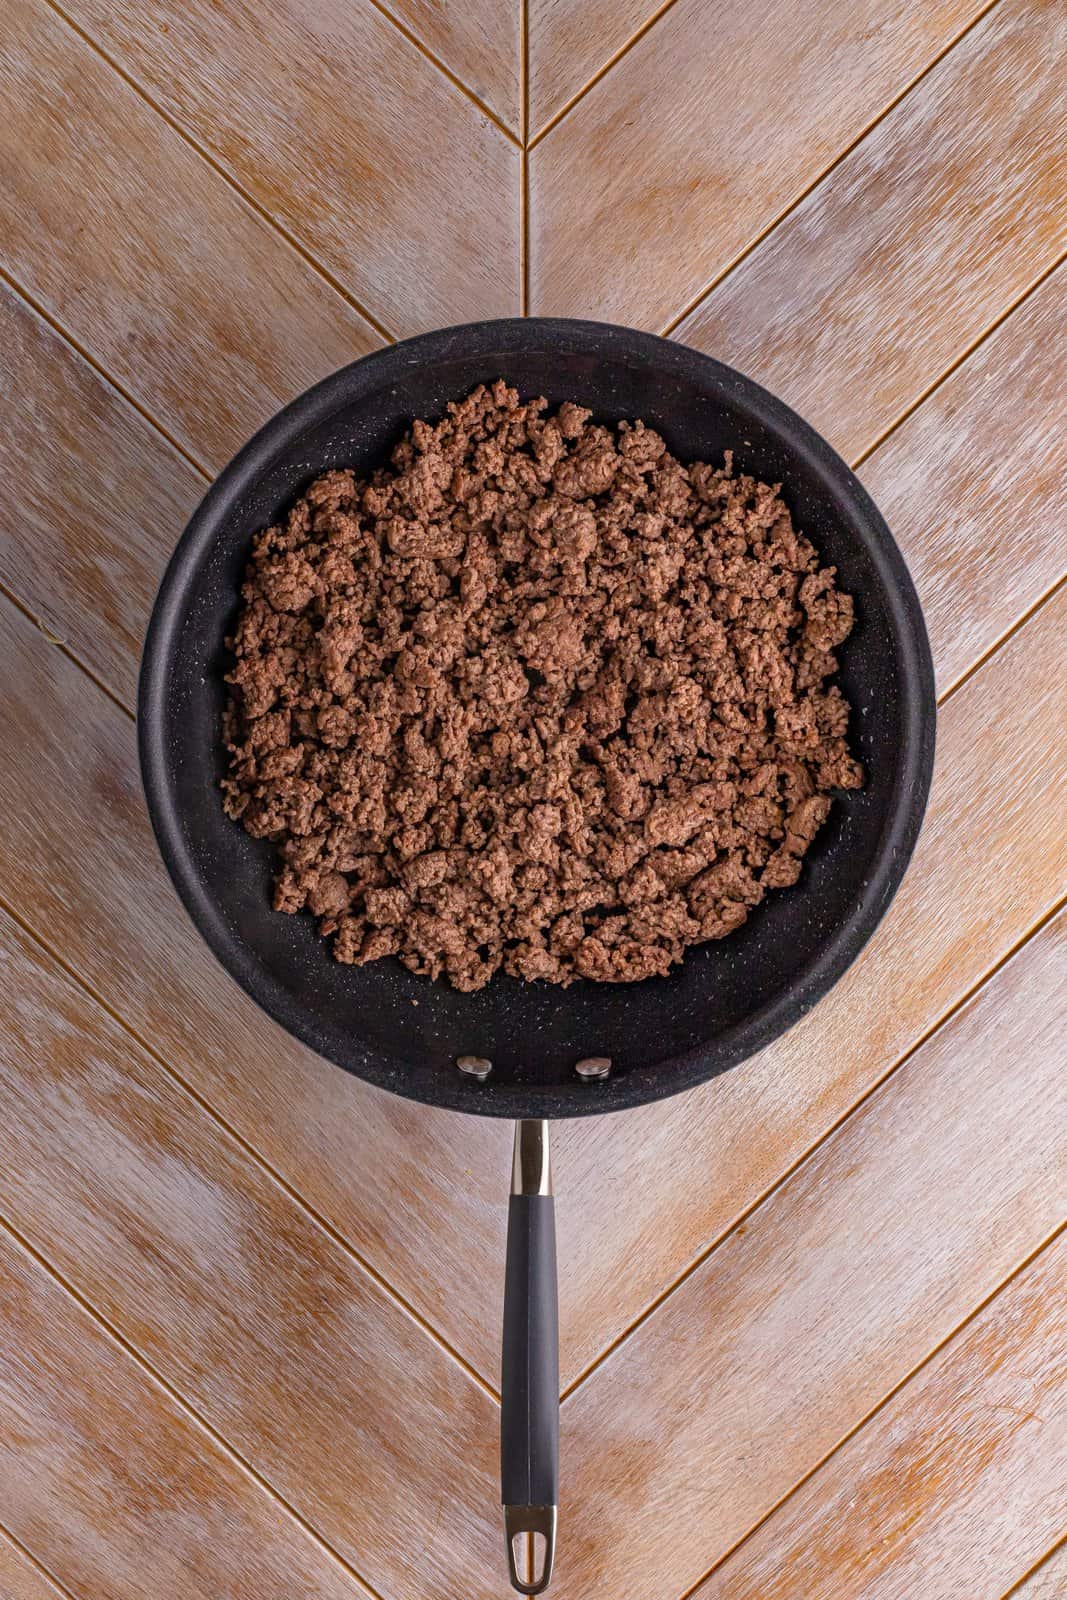 A skillet of cooked ground beef.